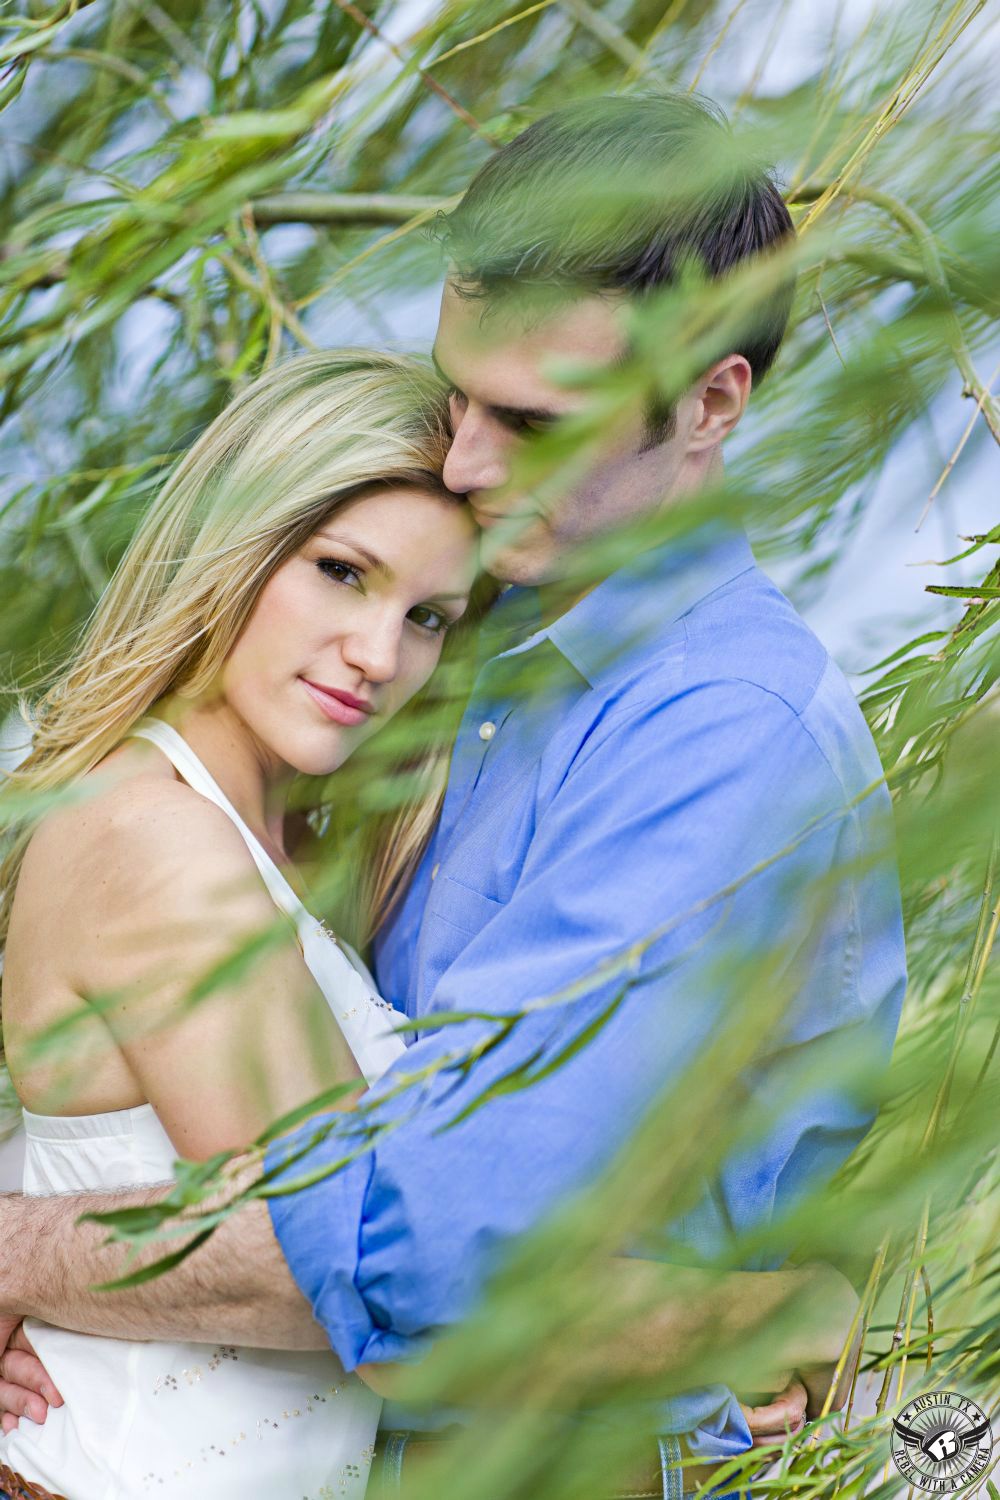 Content, beautiful blond girl wearing white halter top shirt embraces a dark haired guy wearing a blue button up dress shirt surrounded and obscured by willow tree branches with green leaves at Butler Park near the pond in this charming engagement photo in downtown Austin.